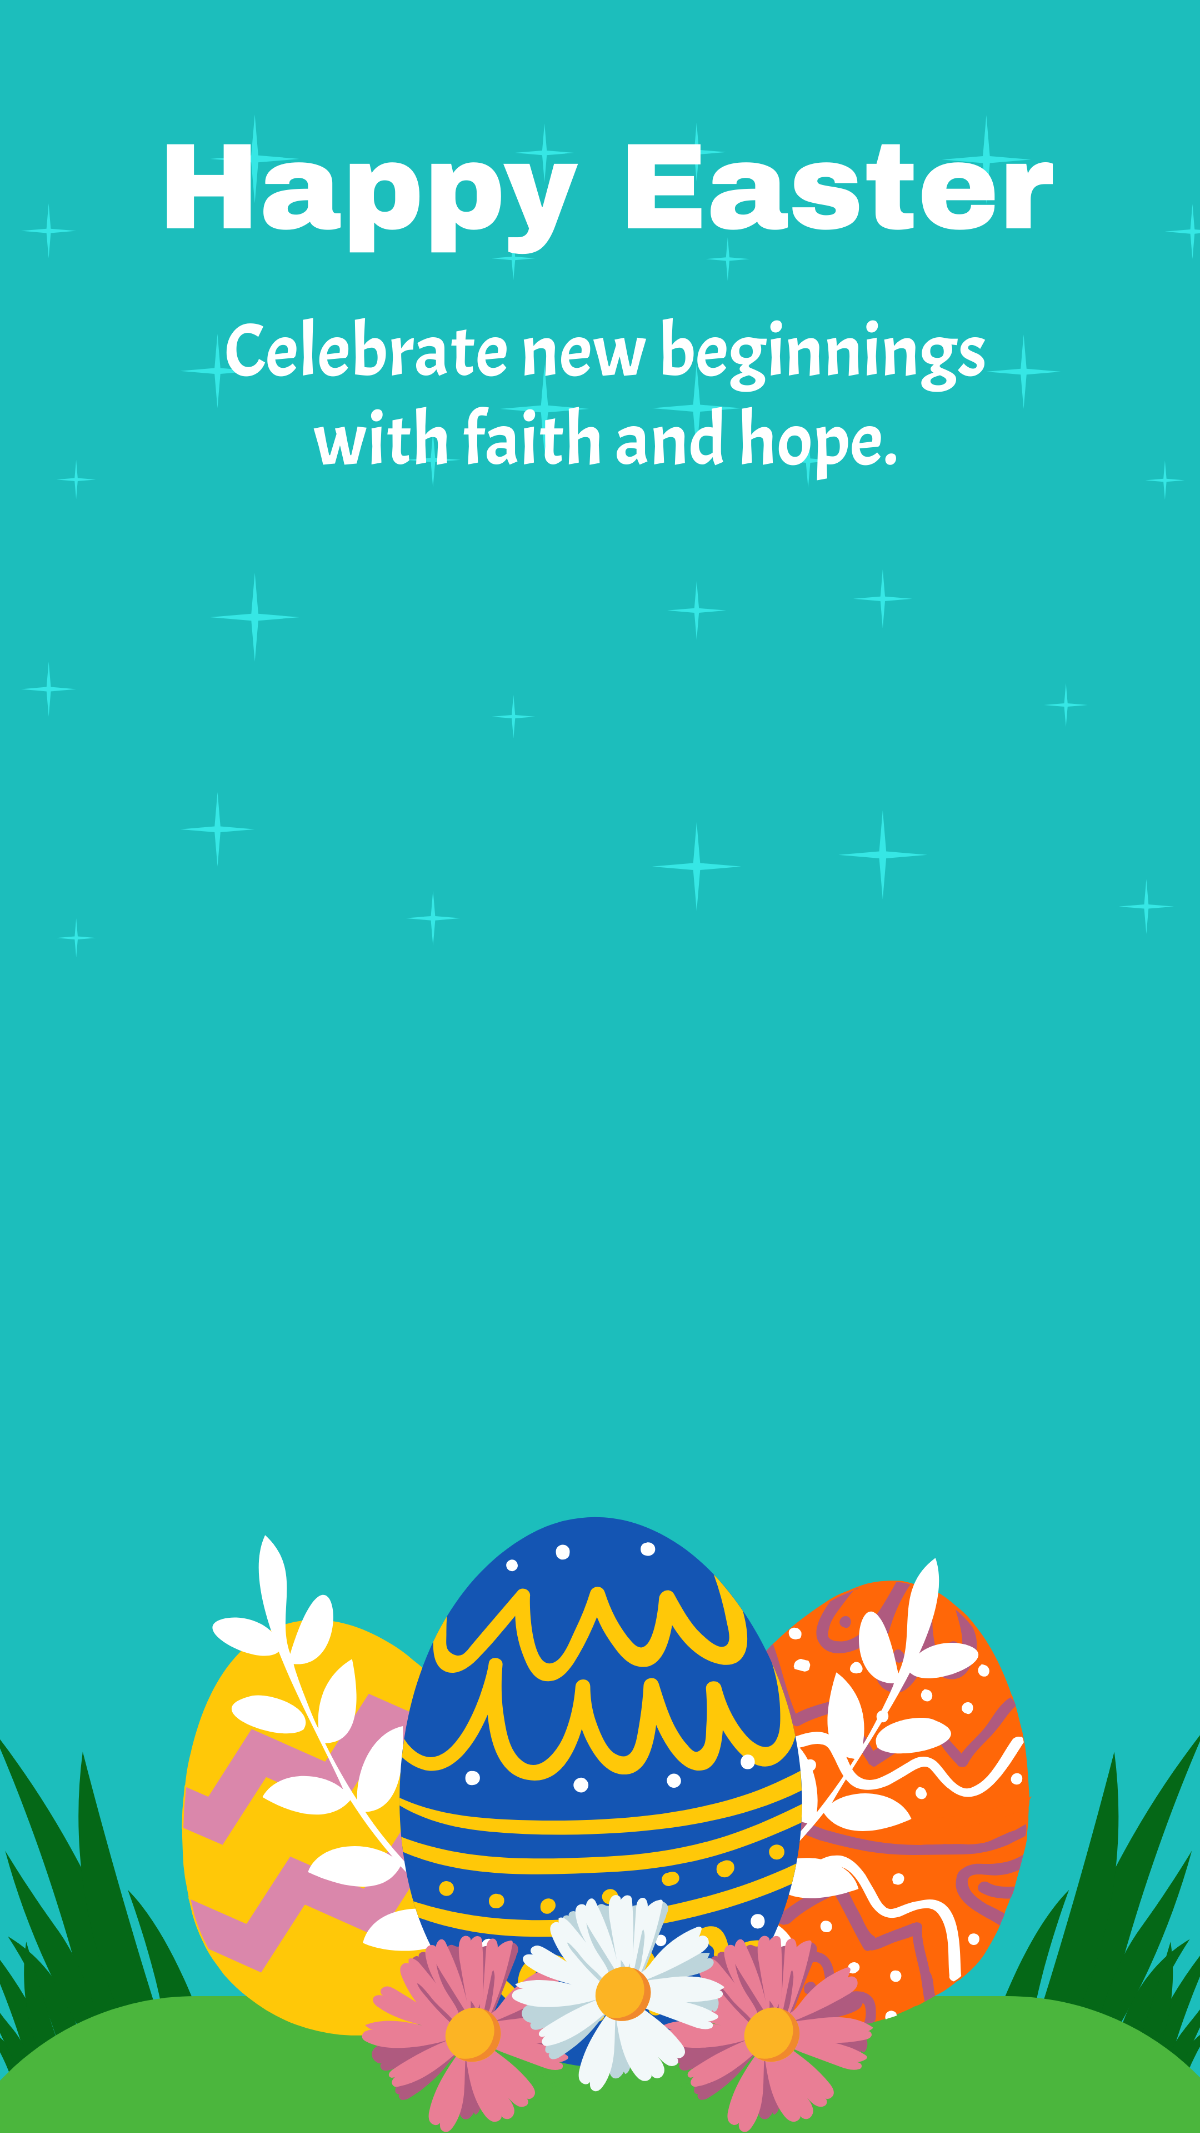 Easter Sunday Snapchat Geofilter